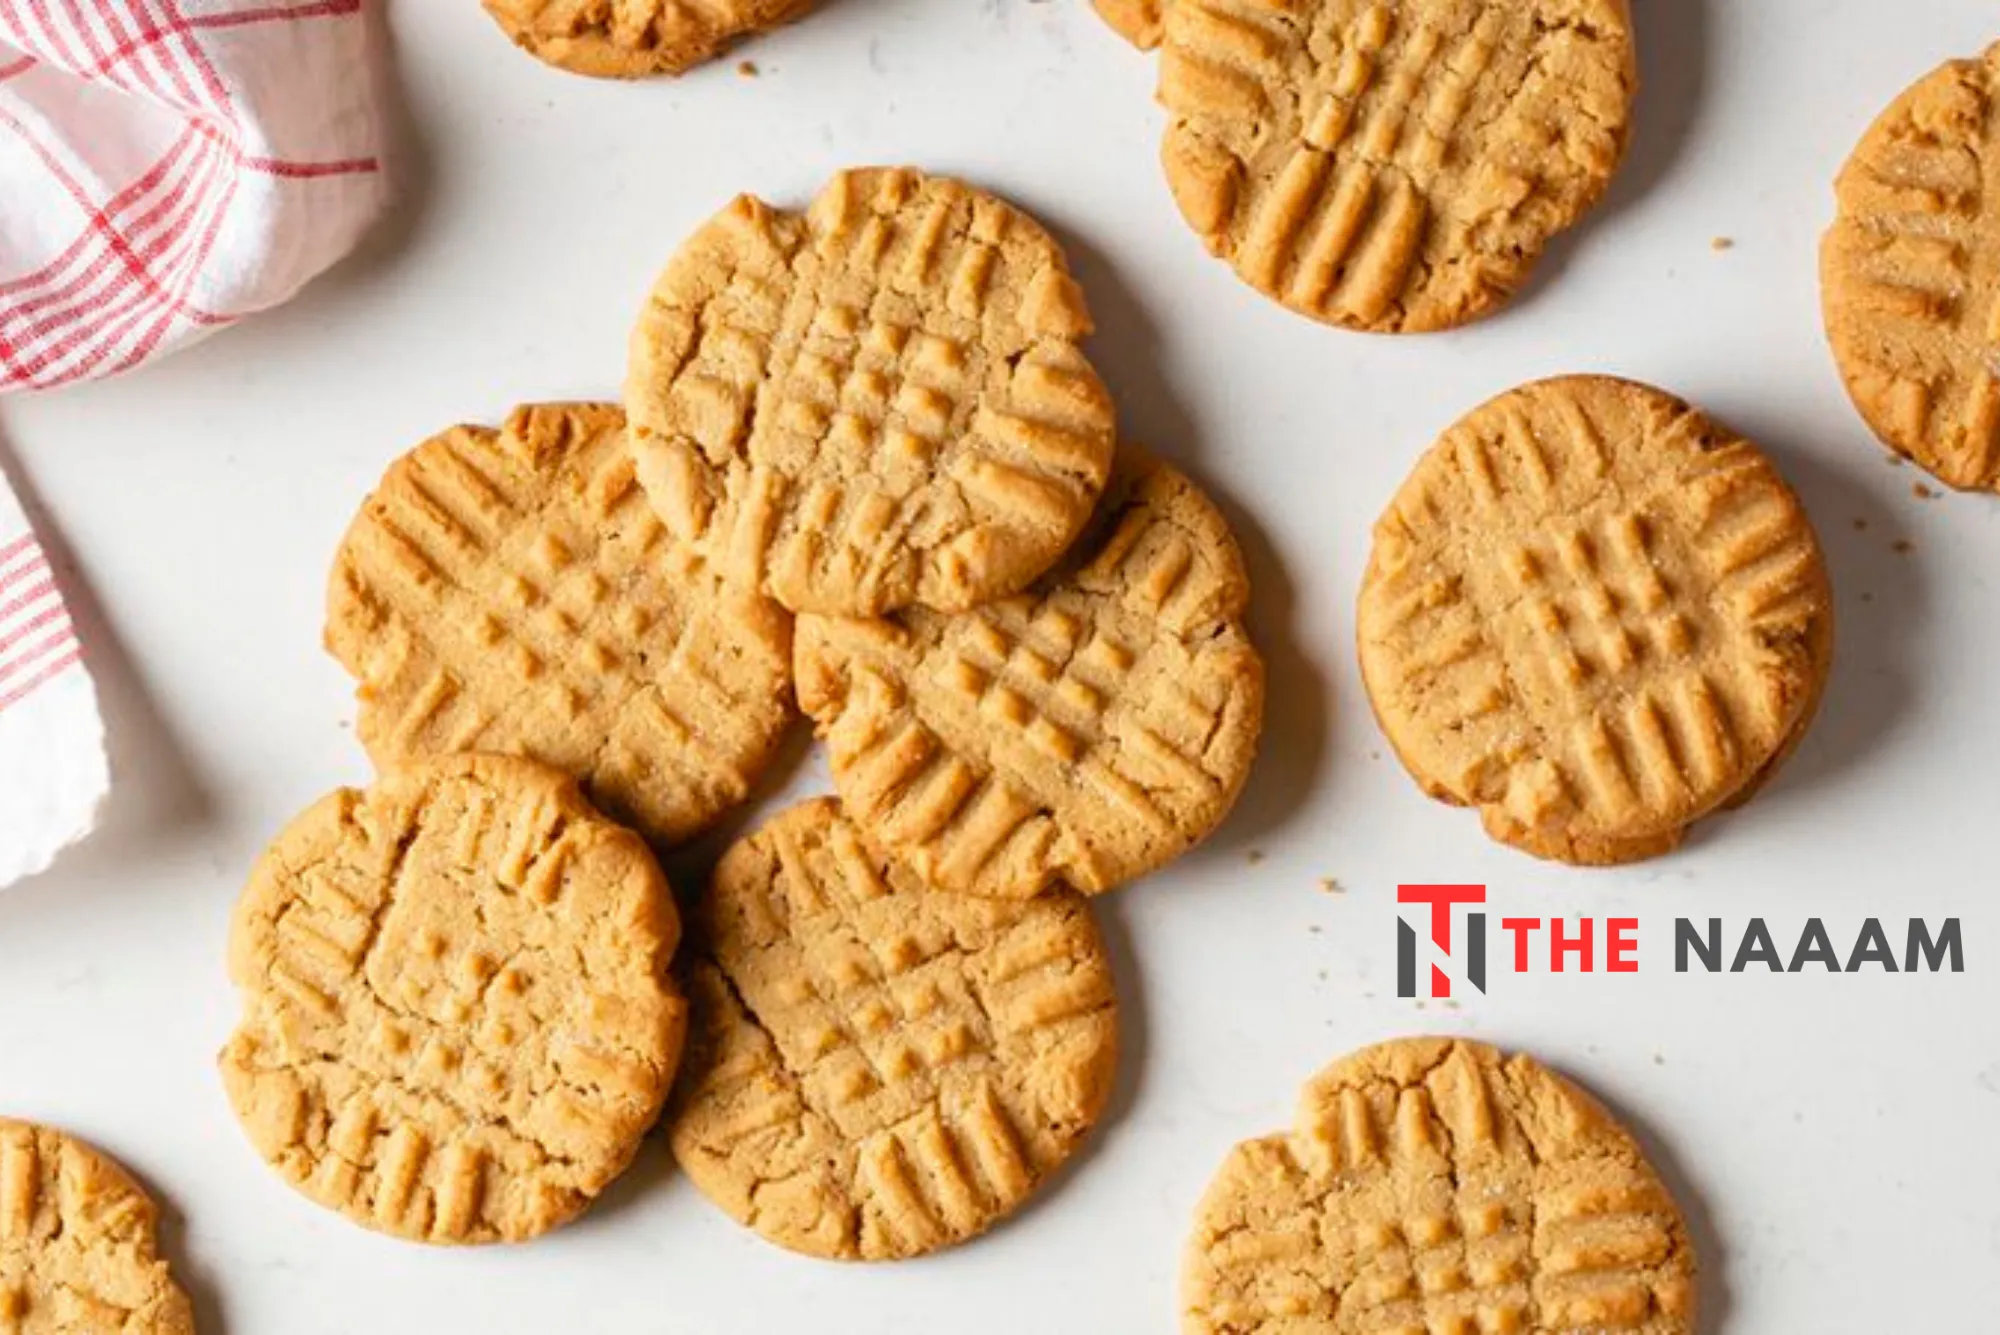 What Are the Basic Ingredients for Peanut Butter Cookies